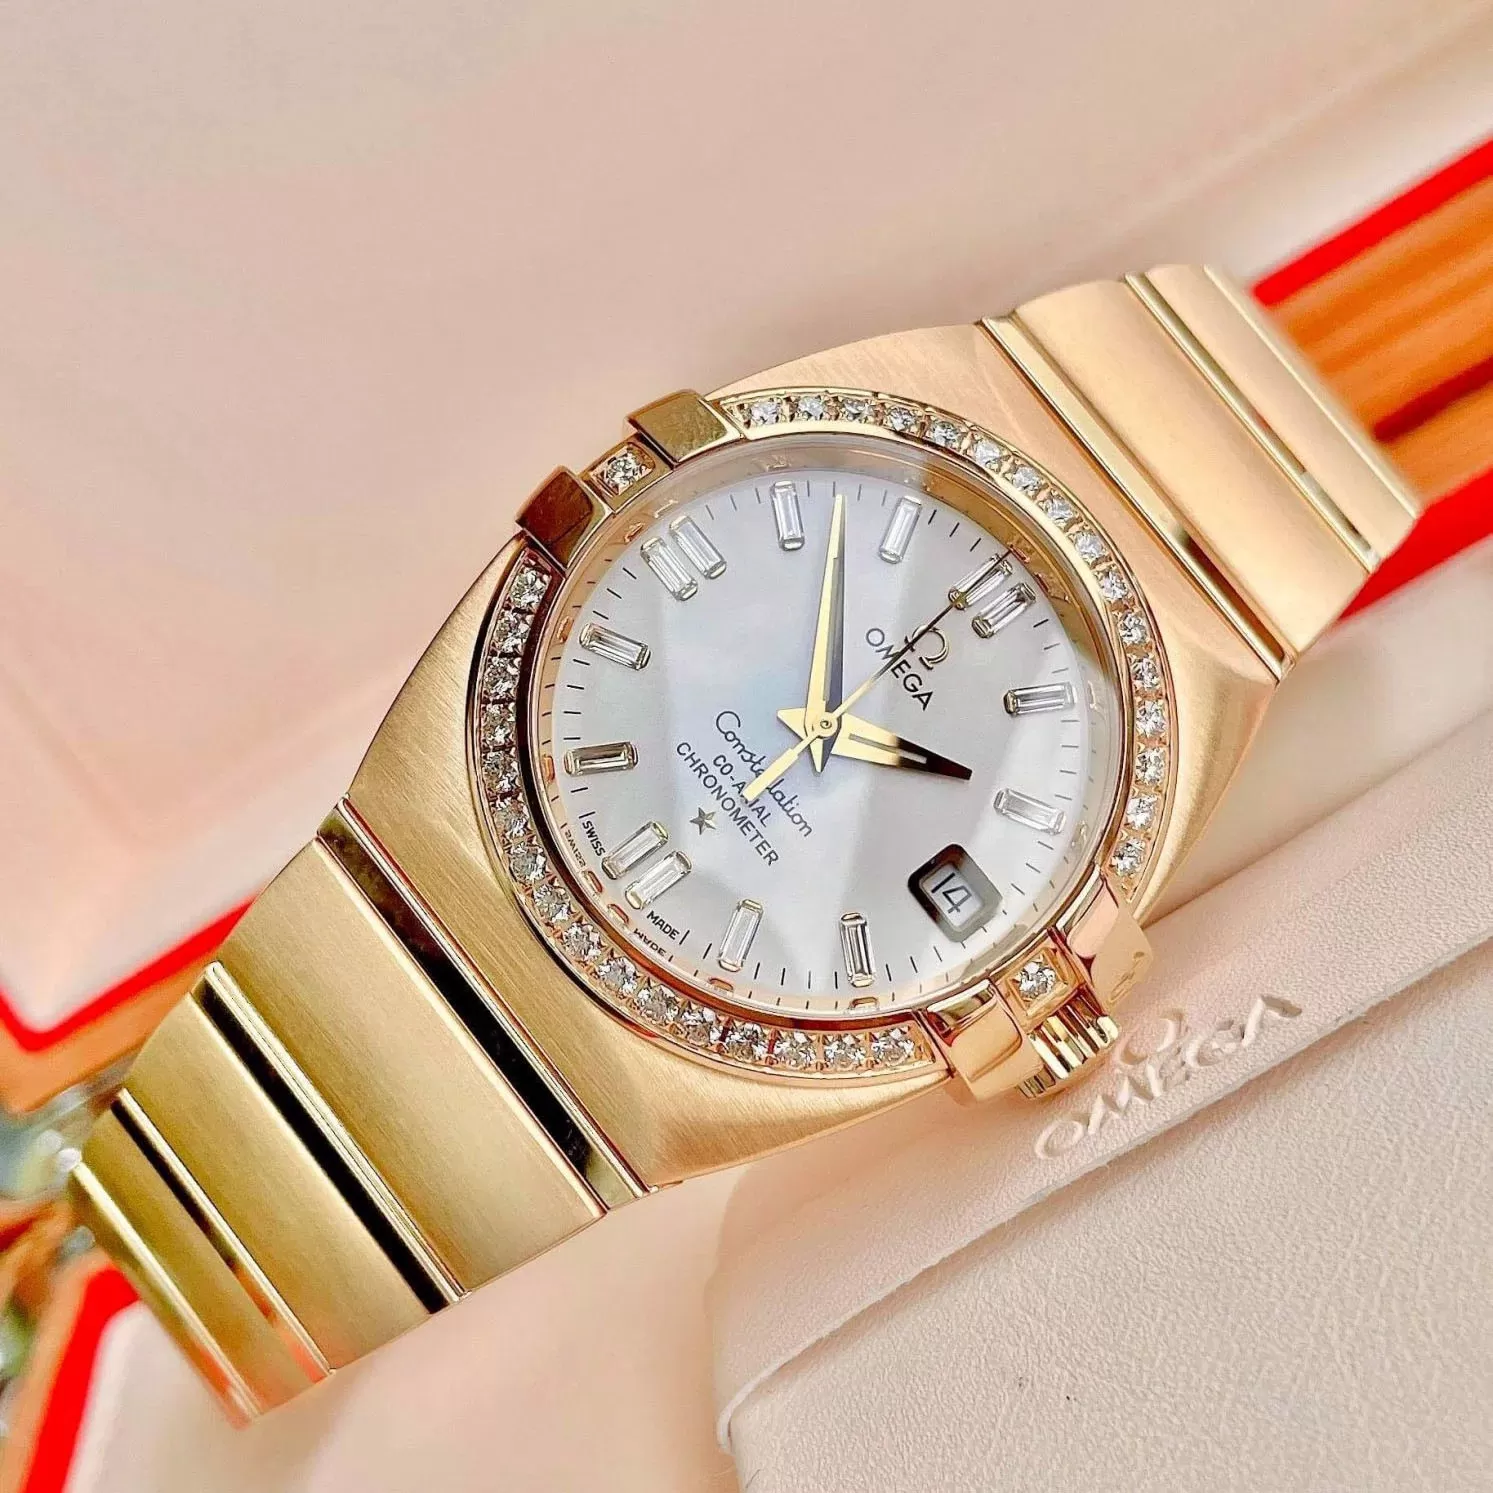 Đồng Hồ Omega Constellation Double Eagle 1113.35.00 11133500